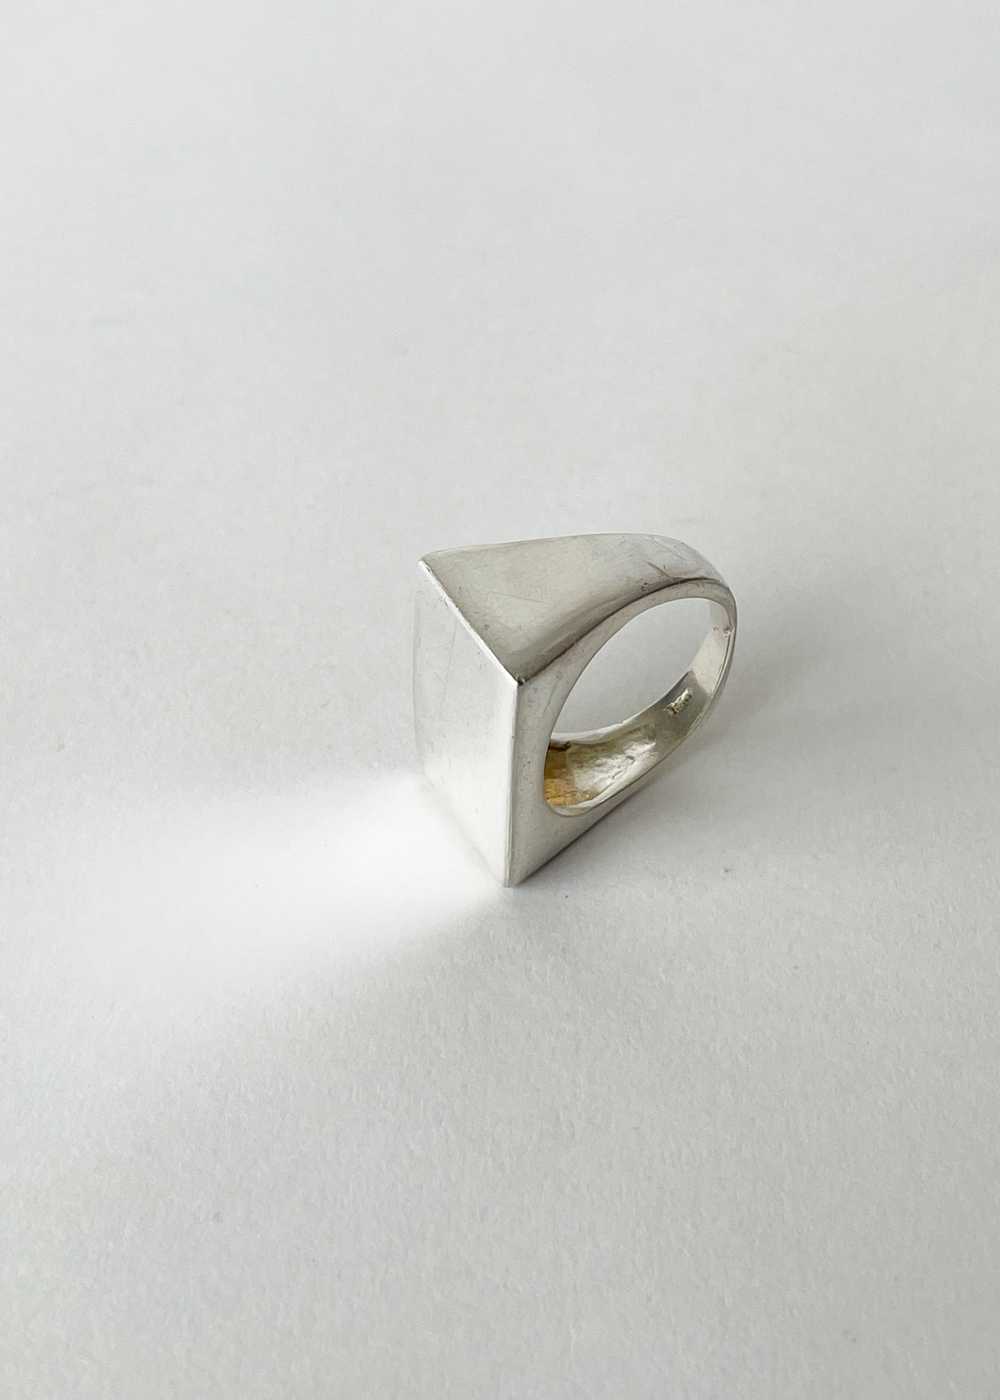 Vintage Italian Sterling Silver Ring - image 3